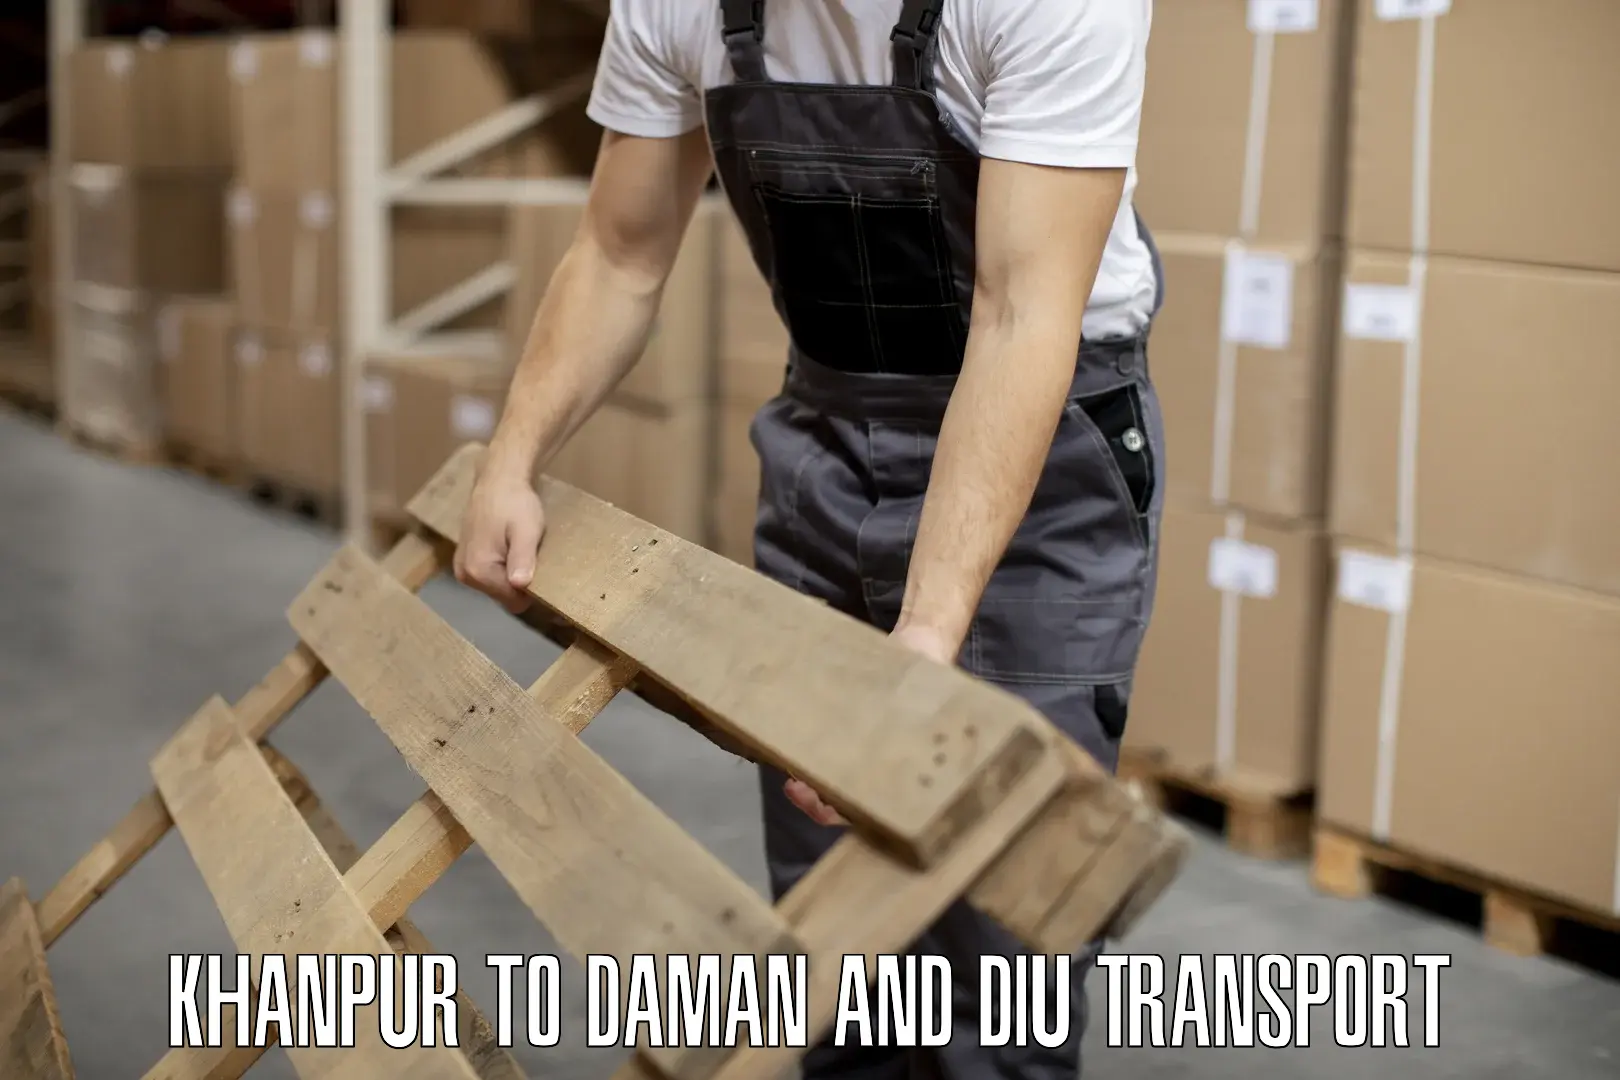 Container transport service Khanpur to Daman and Diu